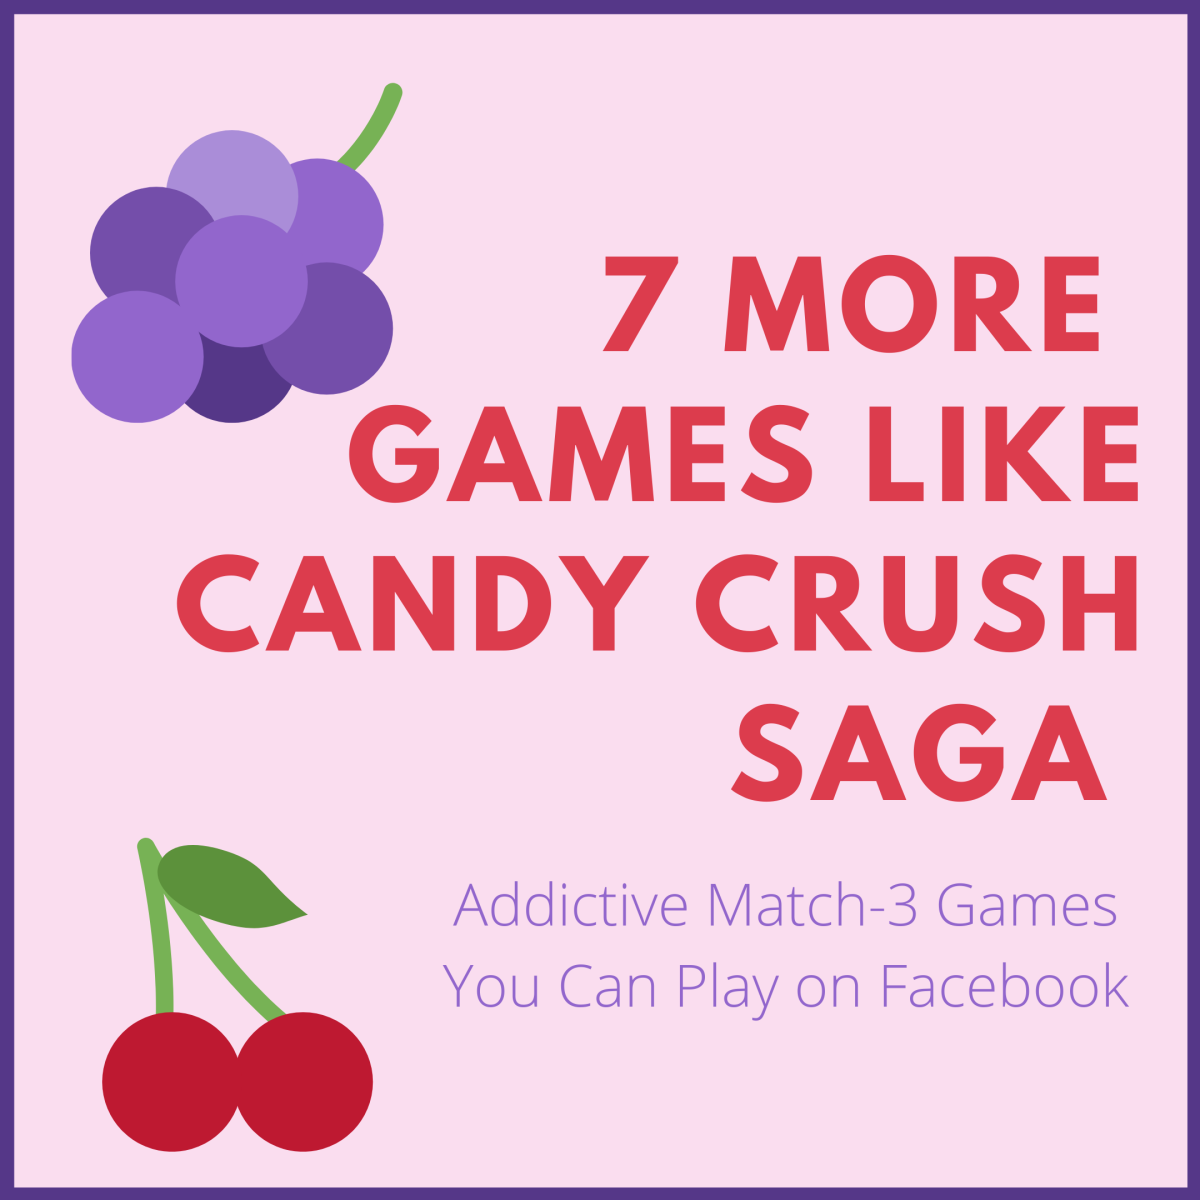 Looking for more match-3 games like Candy Crush Saga? Check out these 7 great games.